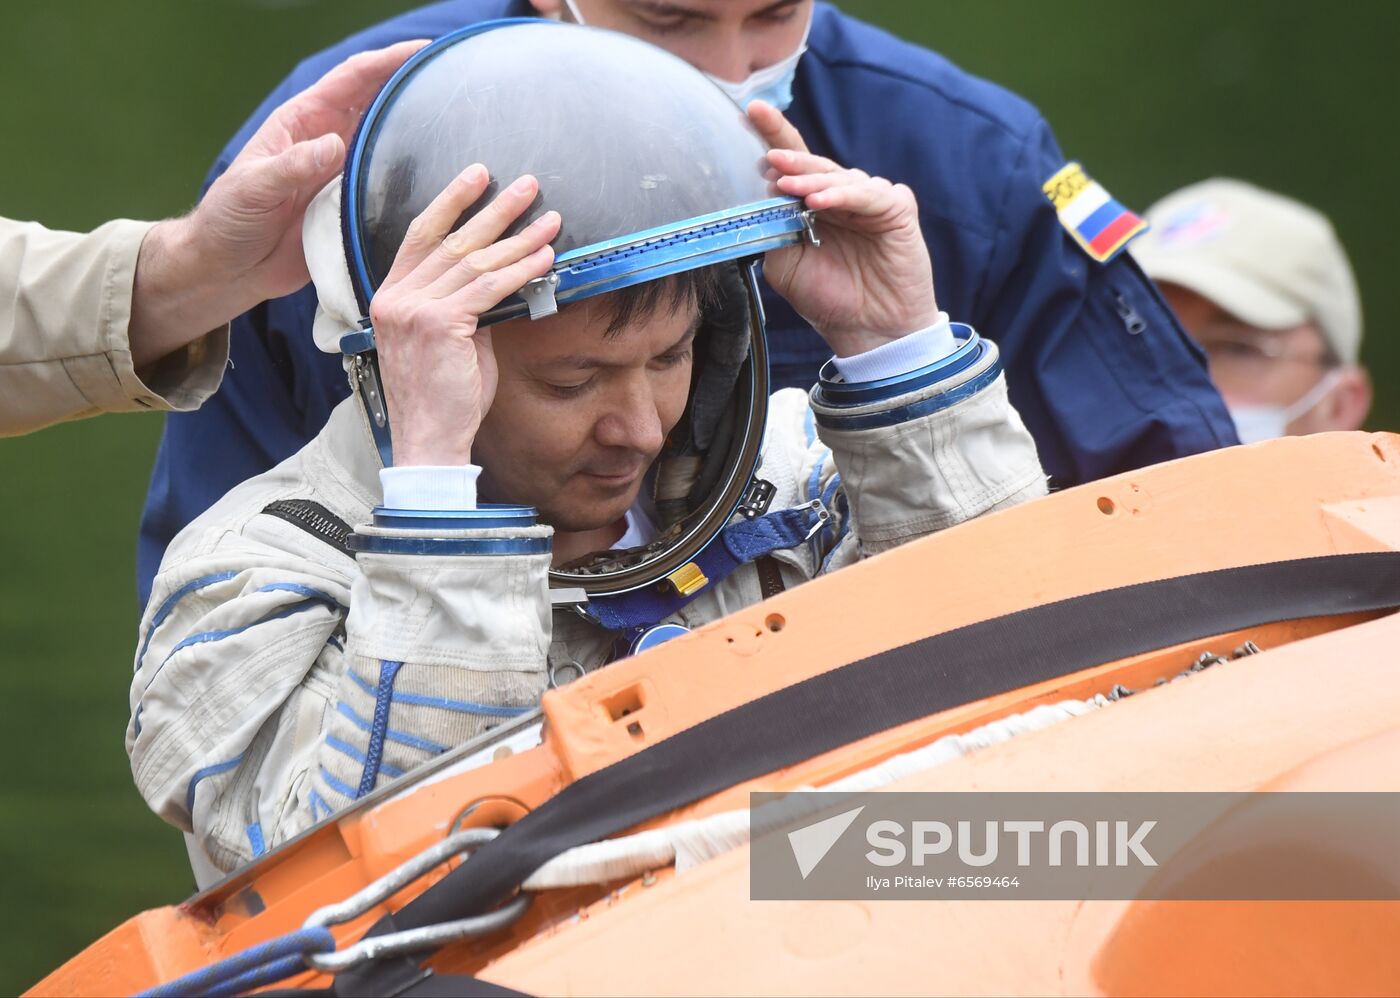 Russia Space Training